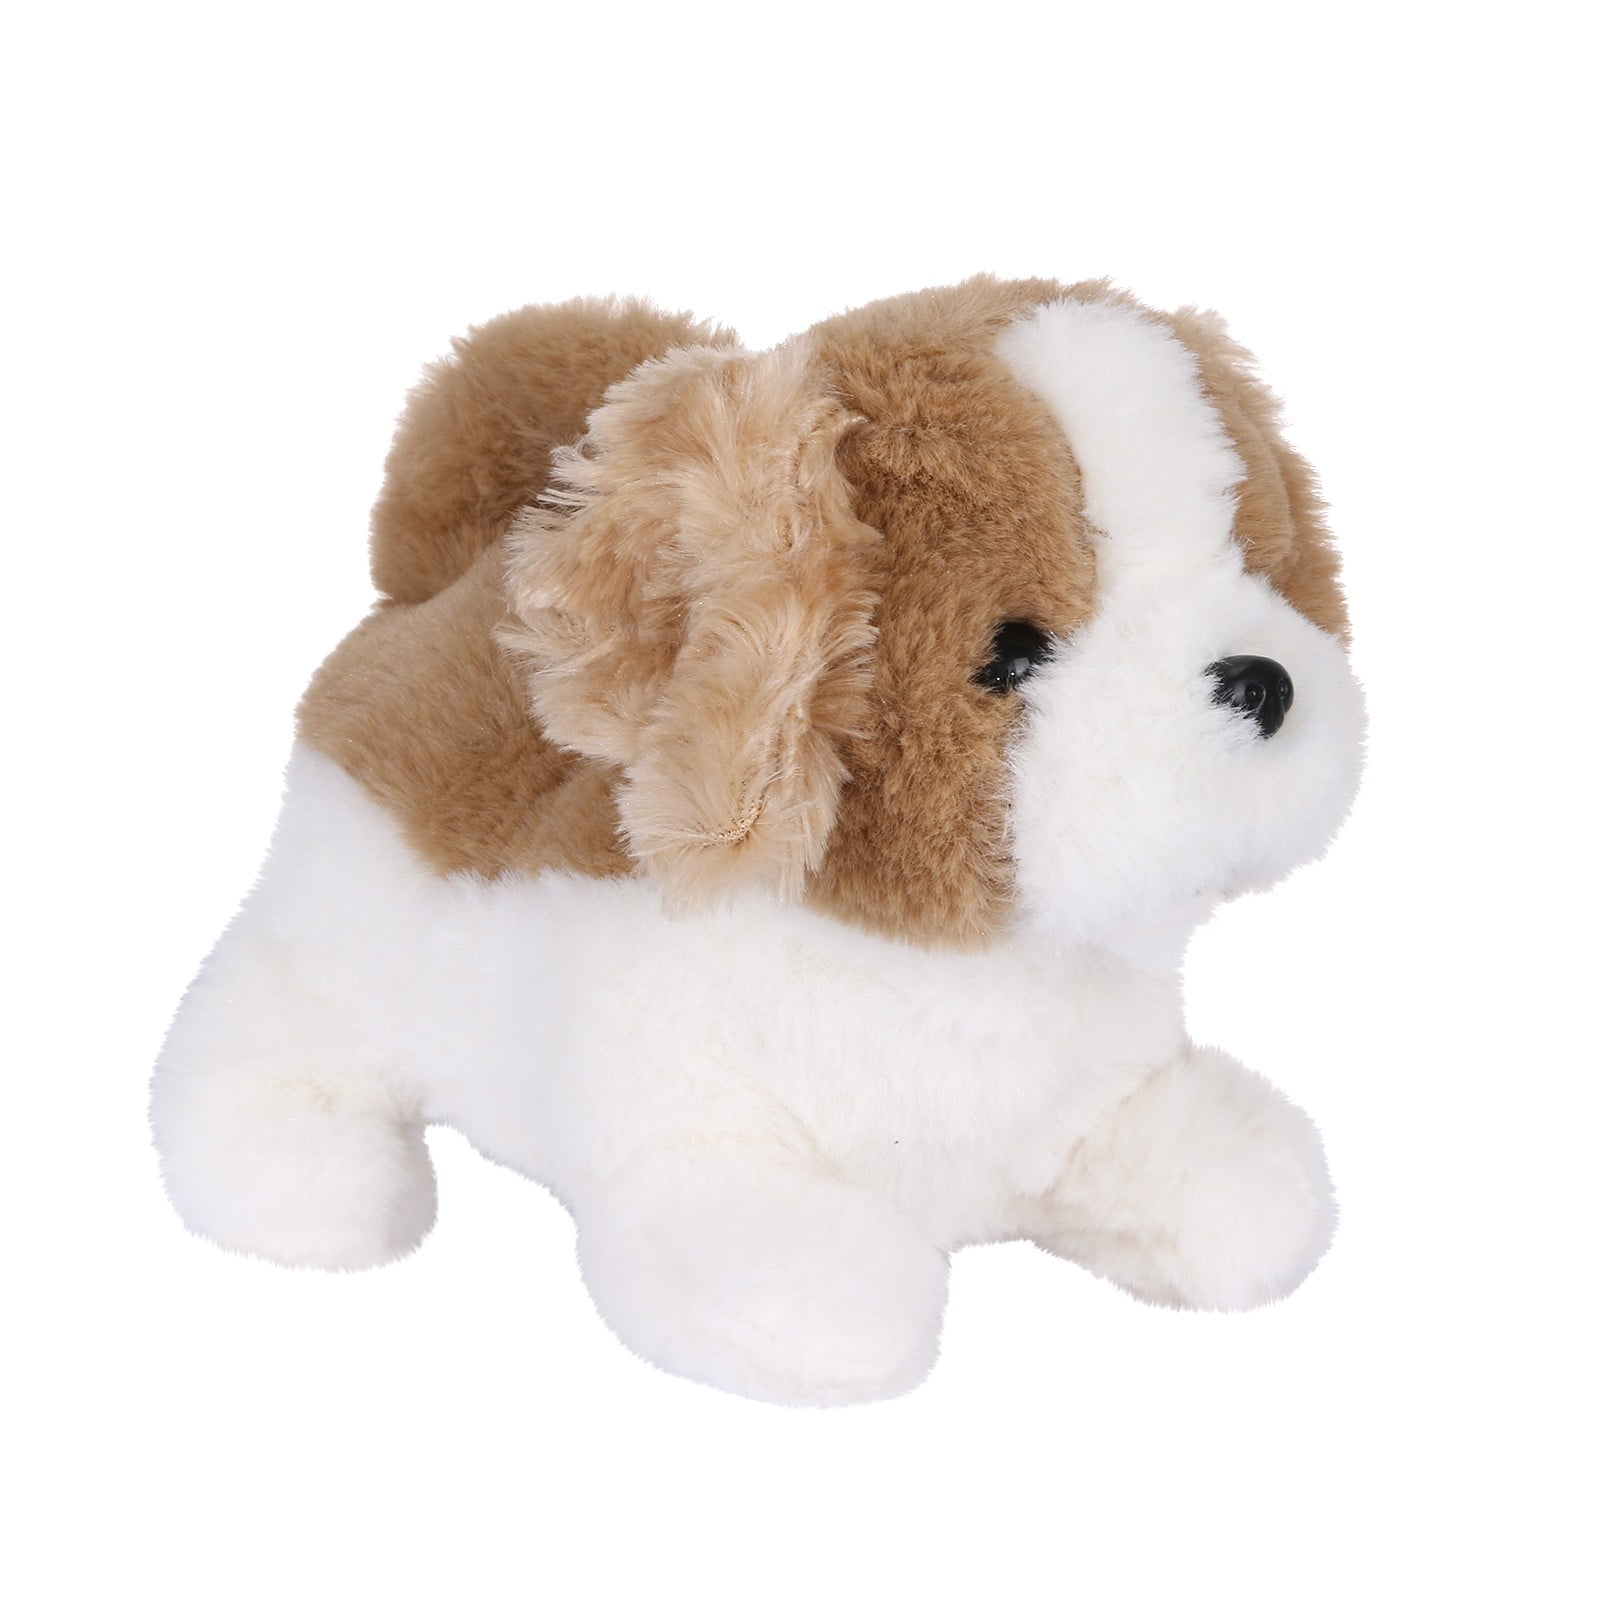 Electric plush doll toys called the walking smart robot dog white-brown terrier 